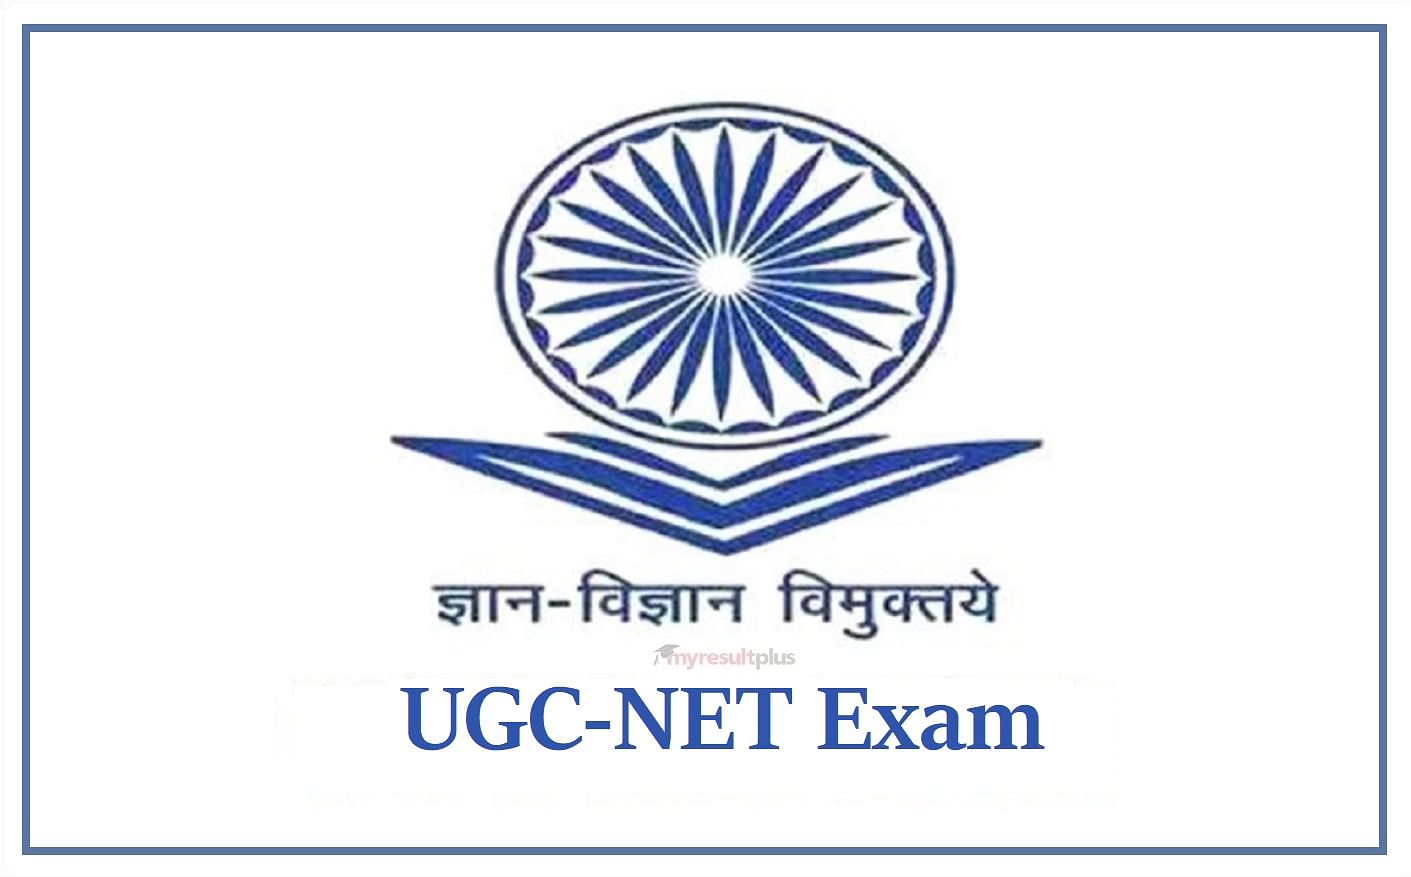 UGC NET 2021: Phase 2 Exam Date Announced, Check Latest Updates Here